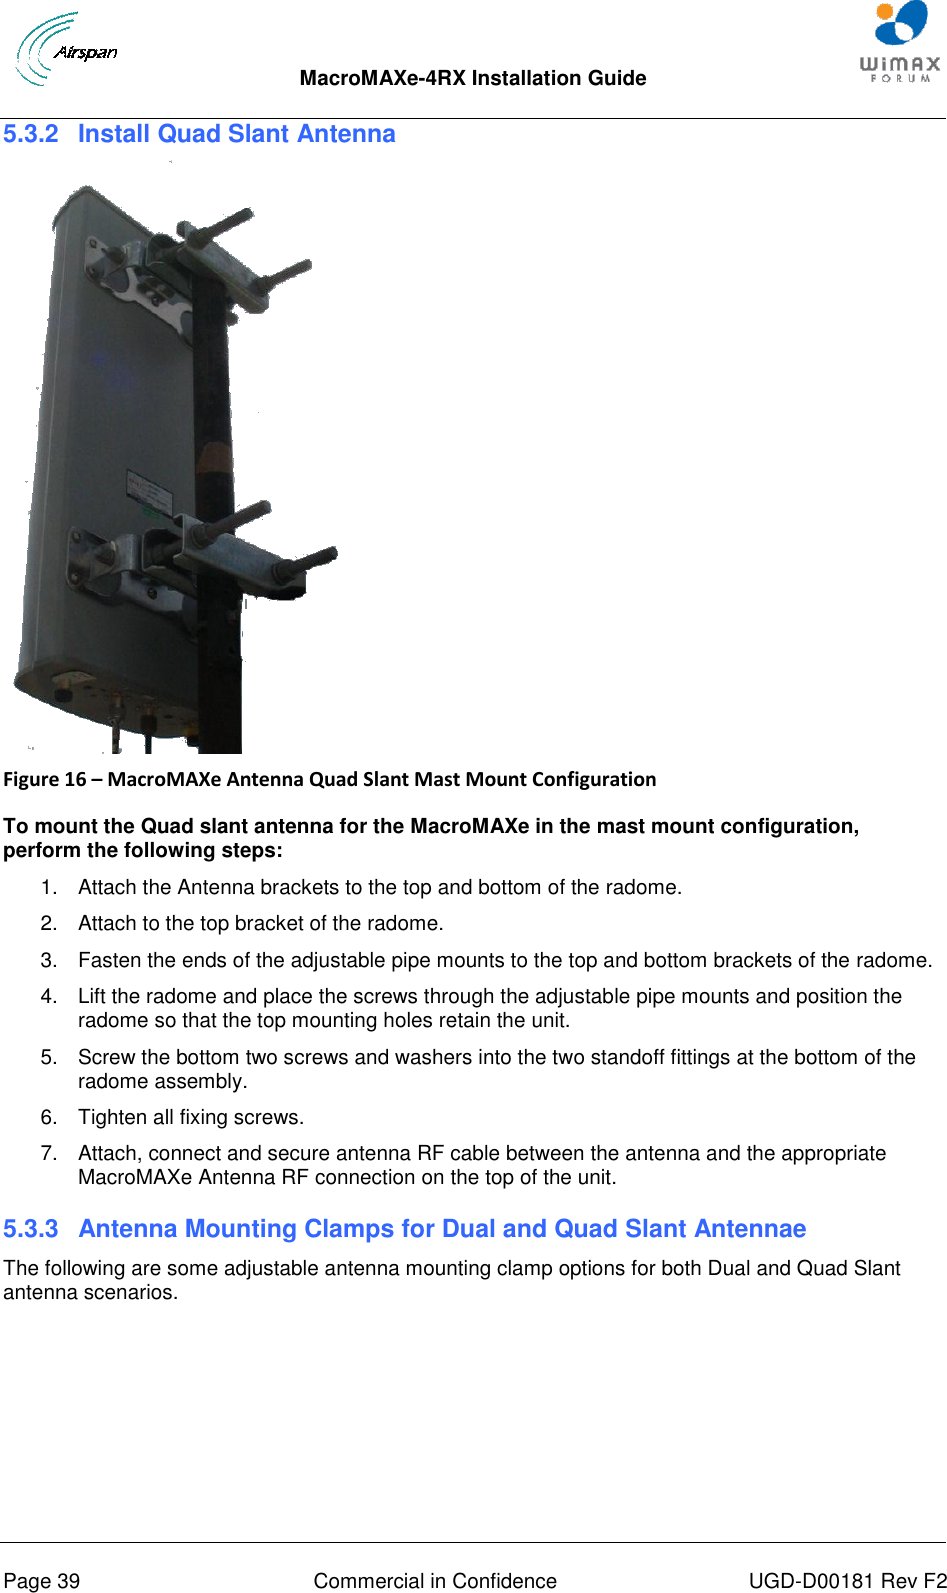  MacroMAXe-4RX Installation Guide       Page 39  Commercial in Confidence  UGD-D00181 Rev F2 5.3.2  Install Quad Slant Antenna    Figure 16 – MacroMAXe Antenna Quad Slant Mast Mount Configuration  To mount the Quad slant antenna for the MacroMAXe in the mast mount configuration, perform the following steps: 1.  Attach the Antenna brackets to the top and bottom of the radome.  2.  Attach to the top bracket of the radome. 3.  Fasten the ends of the adjustable pipe mounts to the top and bottom brackets of the radome. 4.  Lift the radome and place the screws through the adjustable pipe mounts and position the radome so that the top mounting holes retain the unit. 5.  Screw the bottom two screws and washers into the two standoff fittings at the bottom of the radome assembly. 6.  Tighten all fixing screws. 7.  Attach, connect and secure antenna RF cable between the antenna and the appropriate MacroMAXe Antenna RF connection on the top of the unit. 5.3.3  Antenna Mounting Clamps for Dual and Quad Slant Antennae The following are some adjustable antenna mounting clamp options for both Dual and Quad Slant antenna scenarios.  